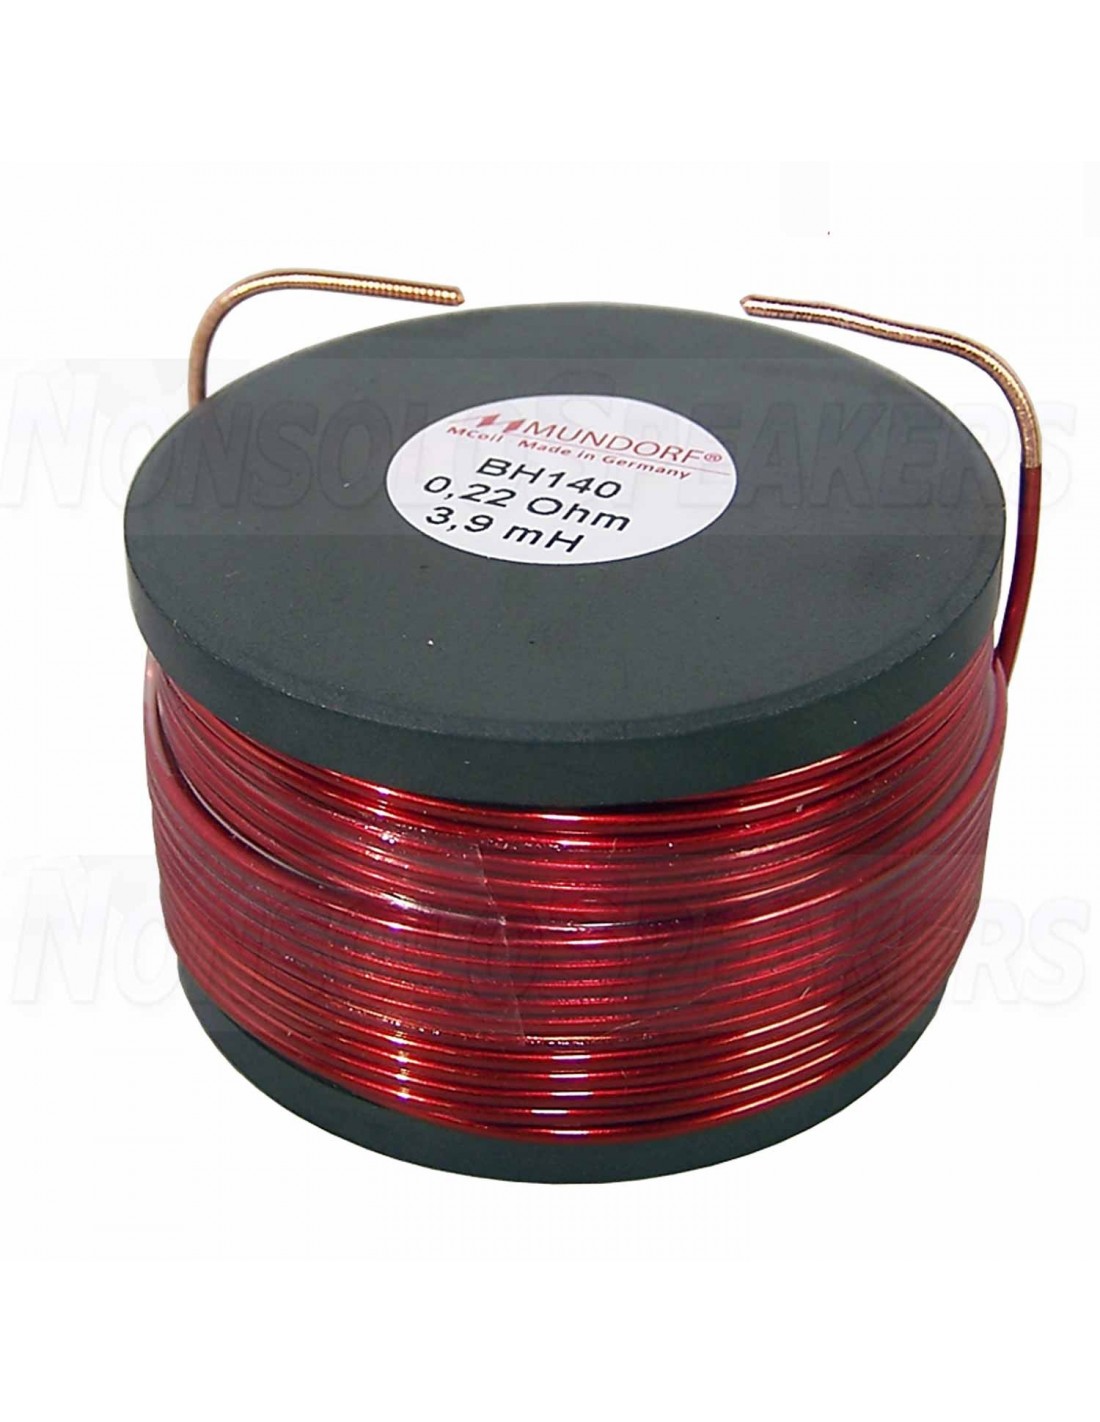 HIGH TEMPERATURE MAGNET WIRE 0.60mm ENAMELLED COPPER WIRE COIL WIRE 50g 